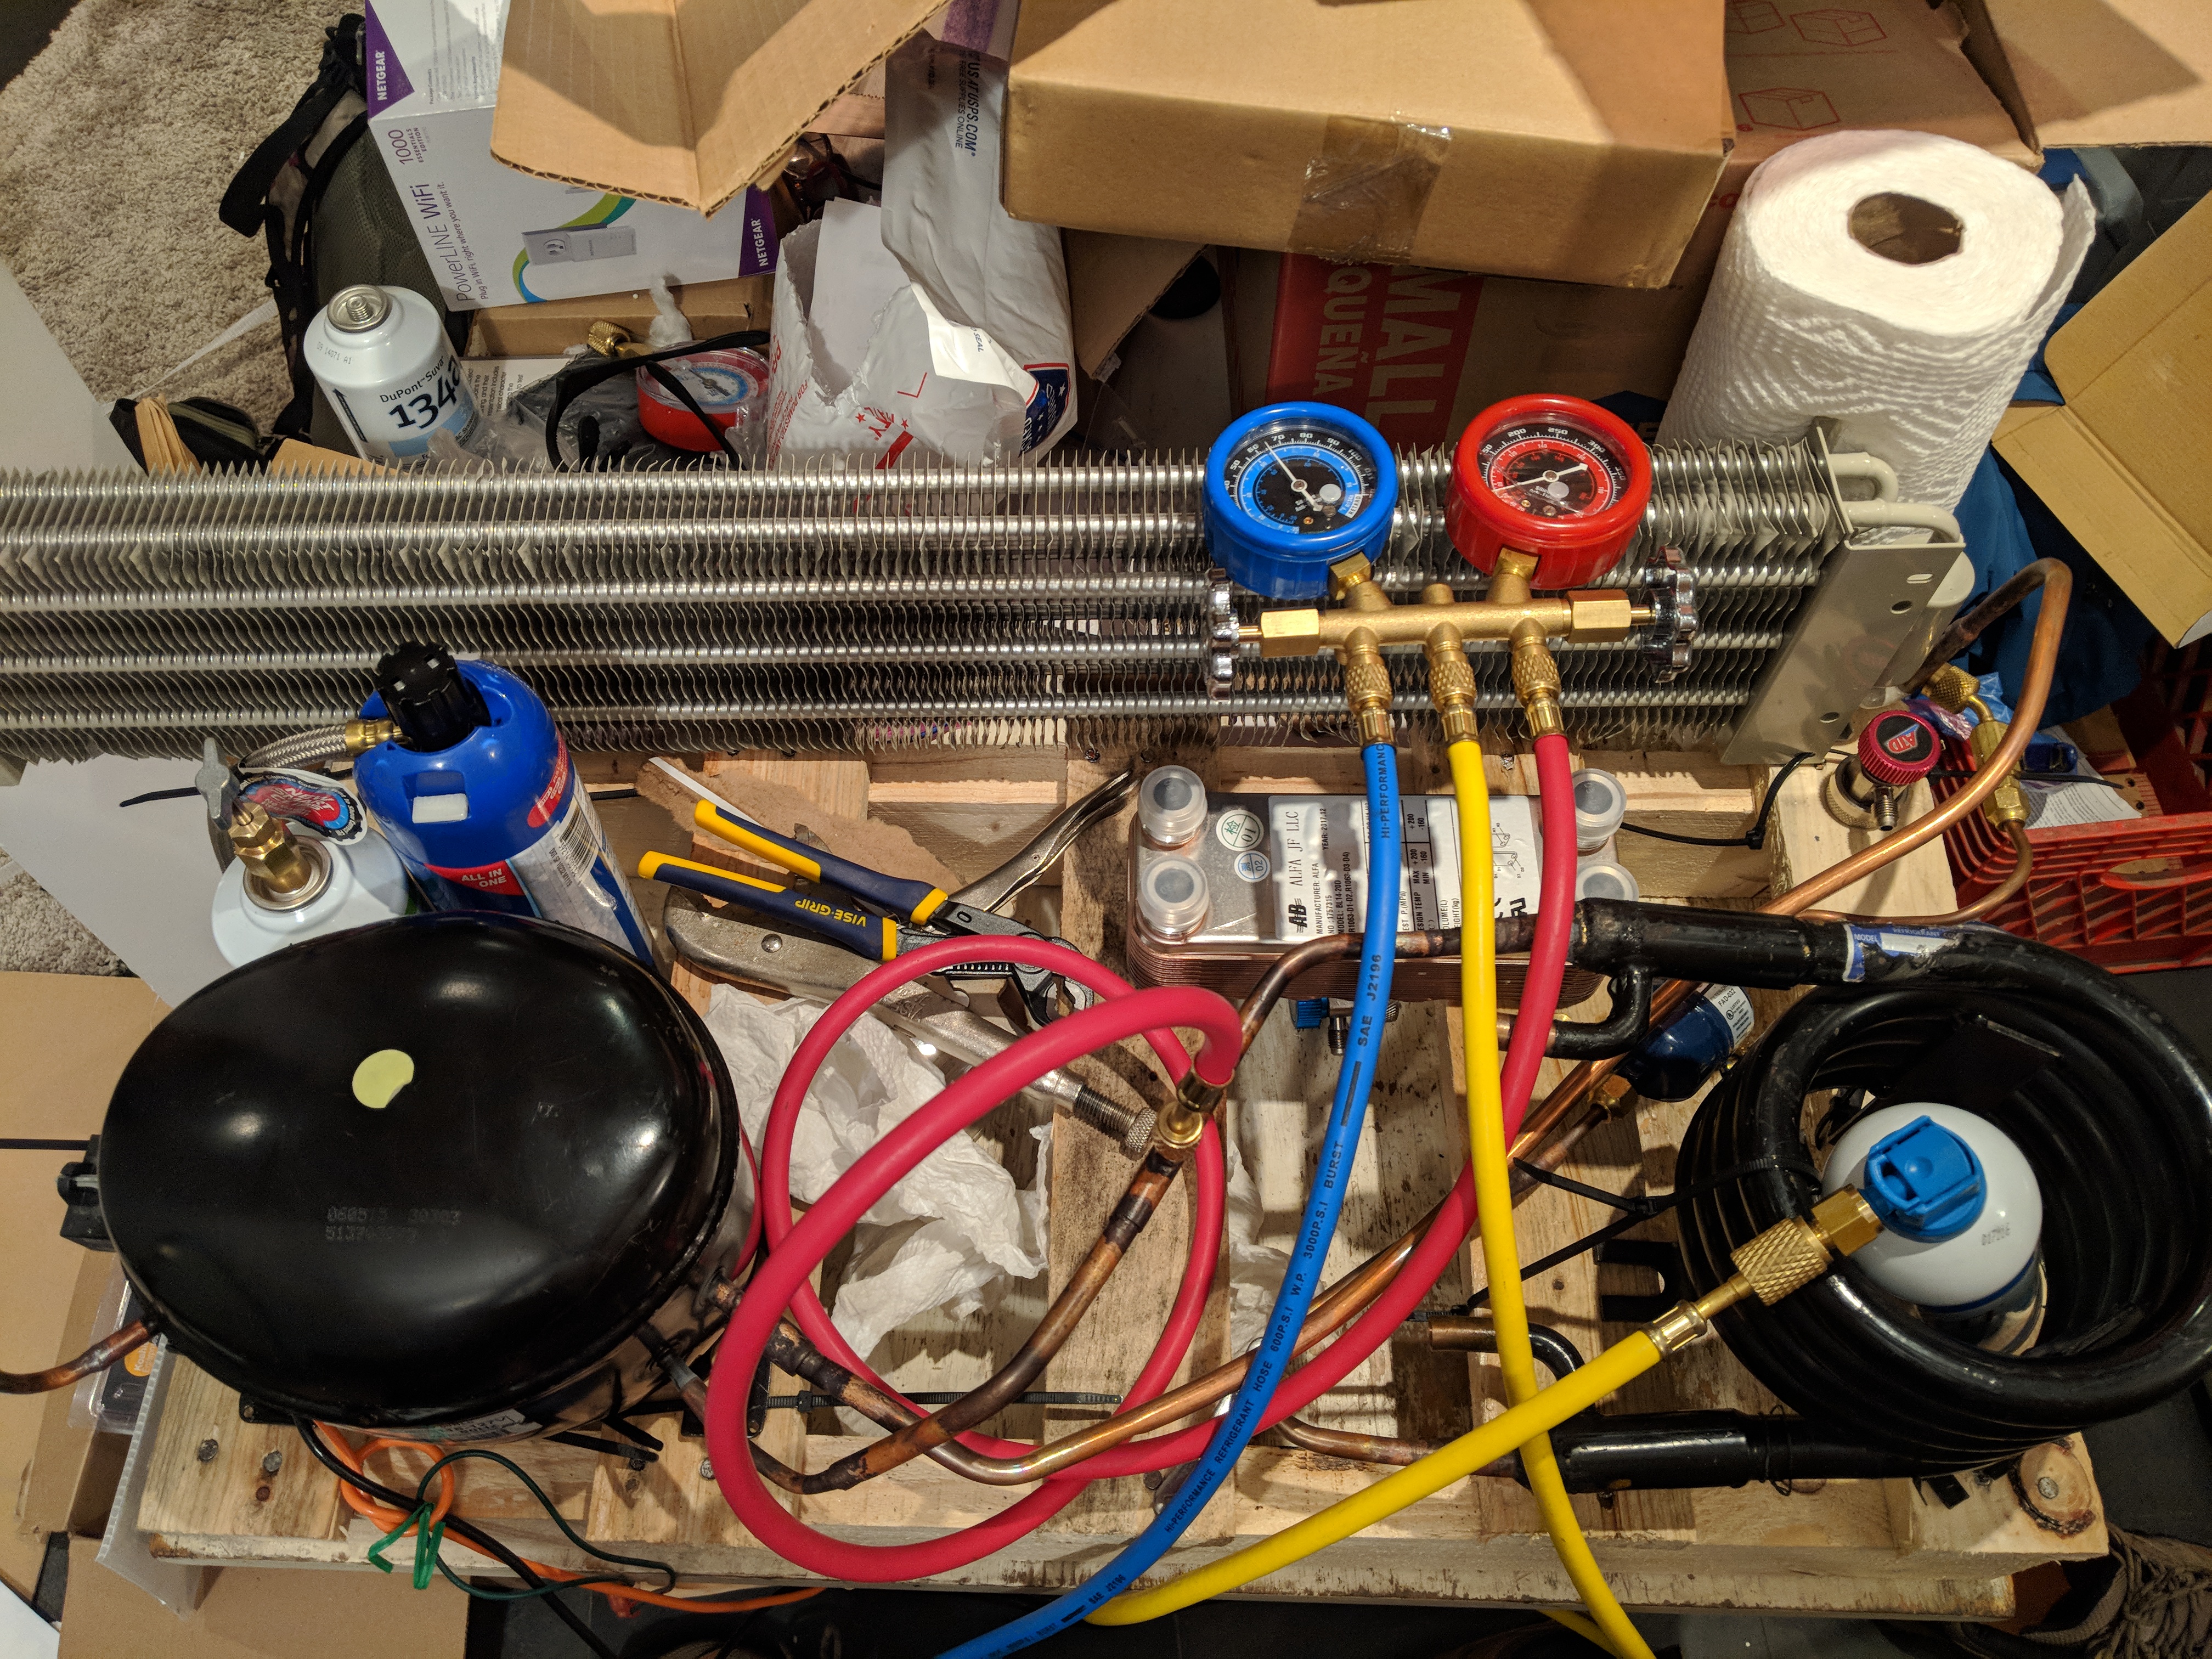 Building a true vapor compression cycle air conditioner - from hardware store parts